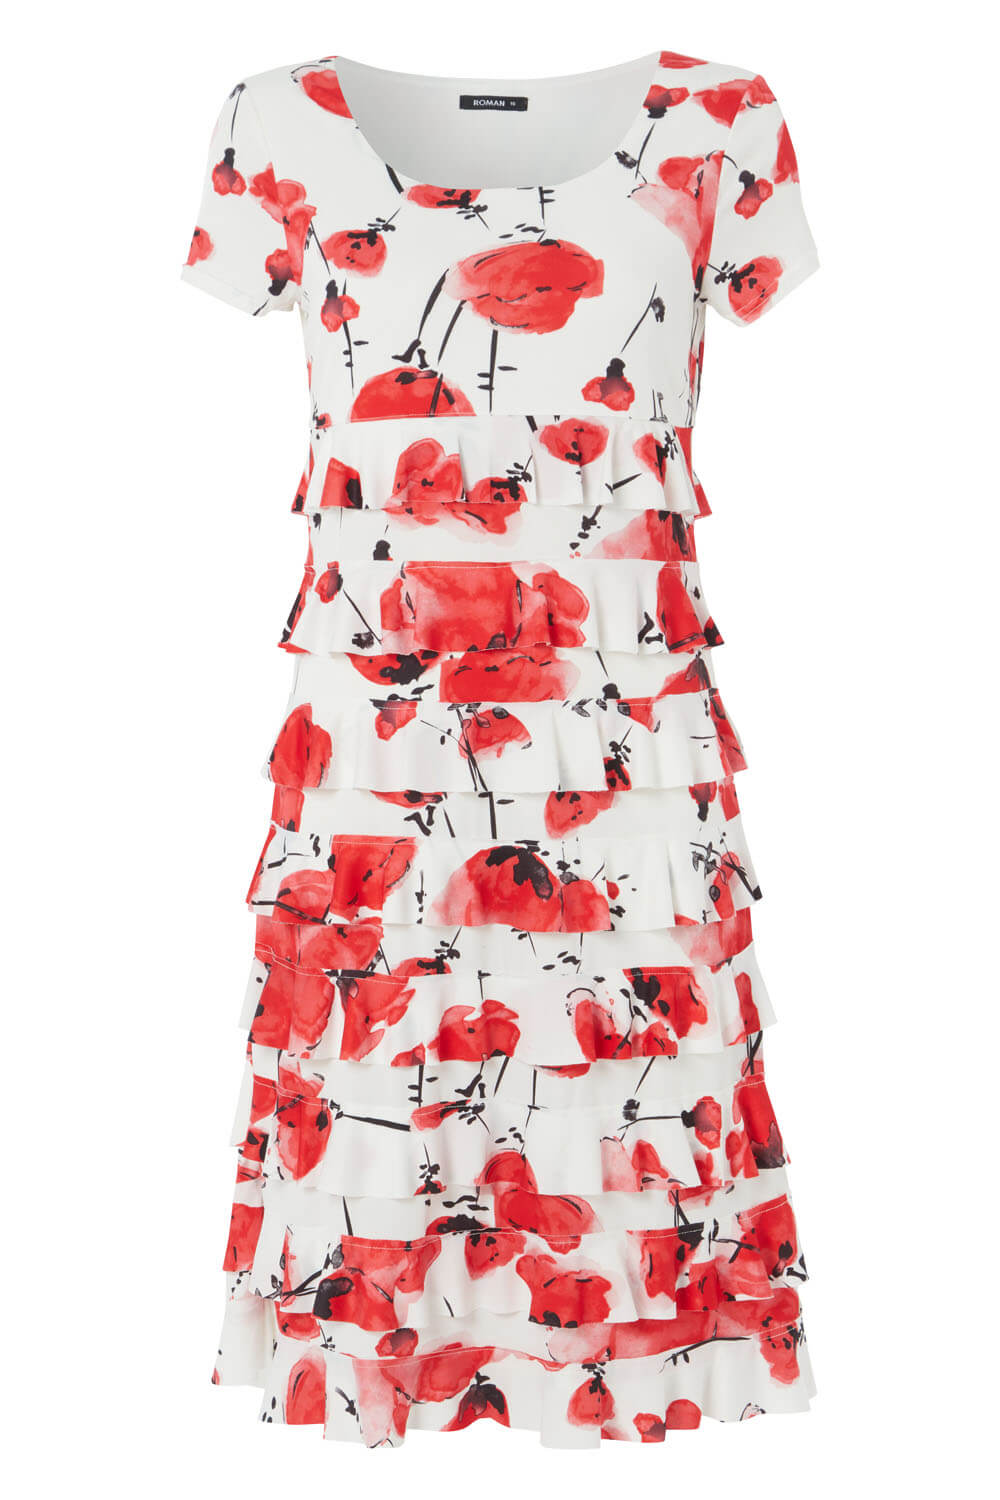 Red Floral Frill Tiered Dress, Image 4 of 4